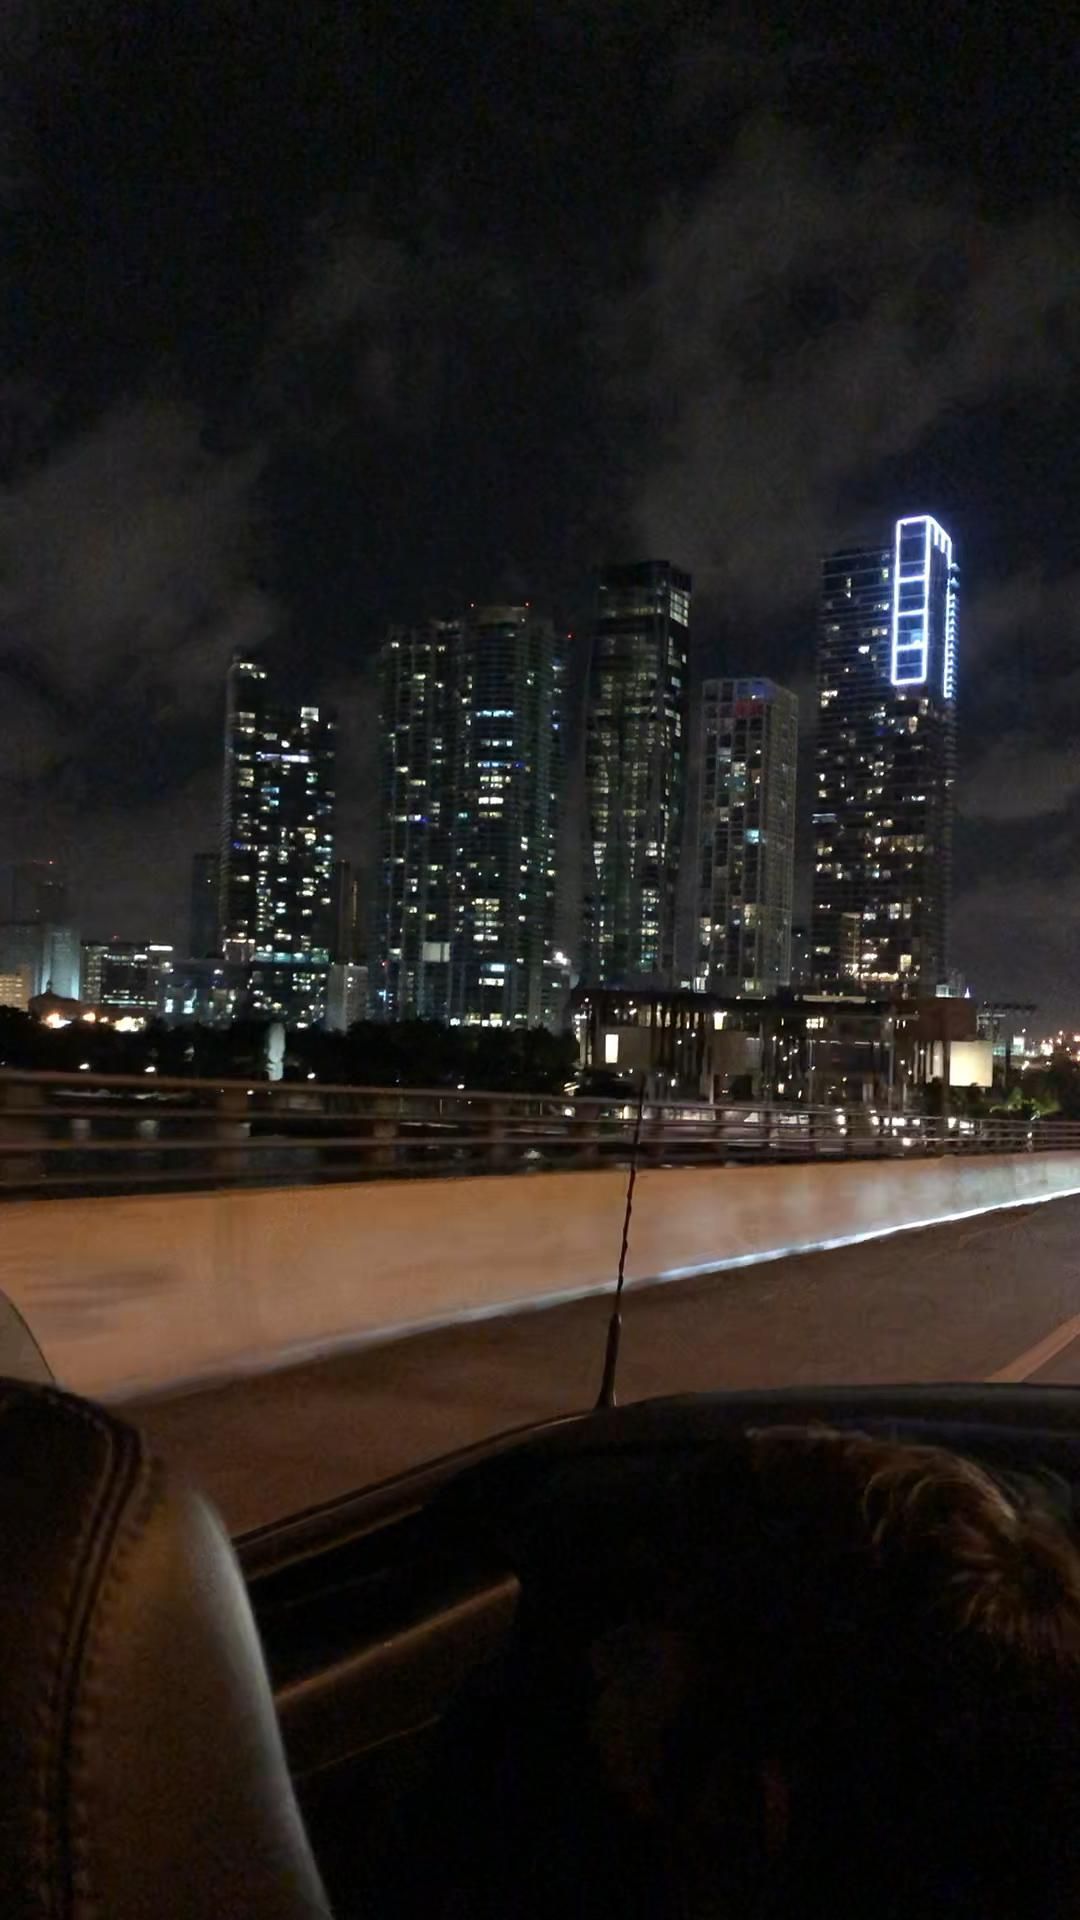 Miami skyline at night from a boat - Miami